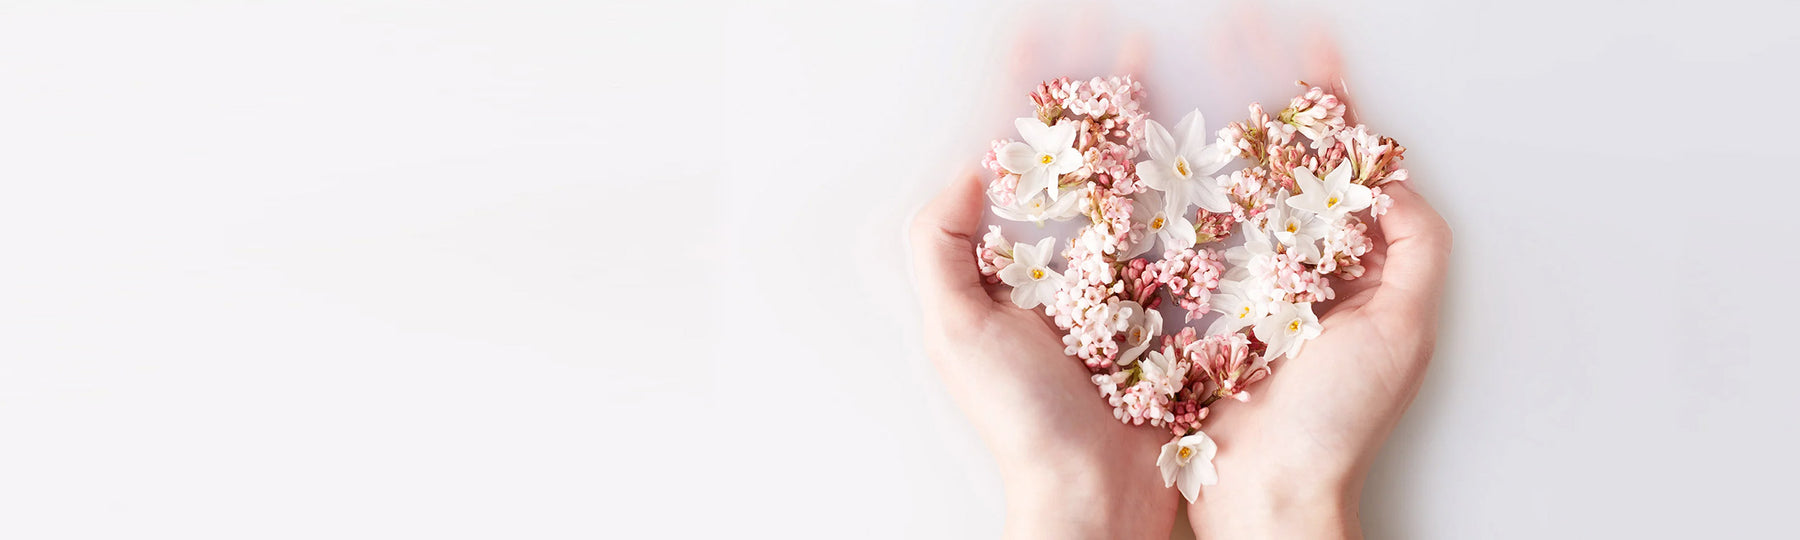 Picture of hands on milky water's surface holding blossom